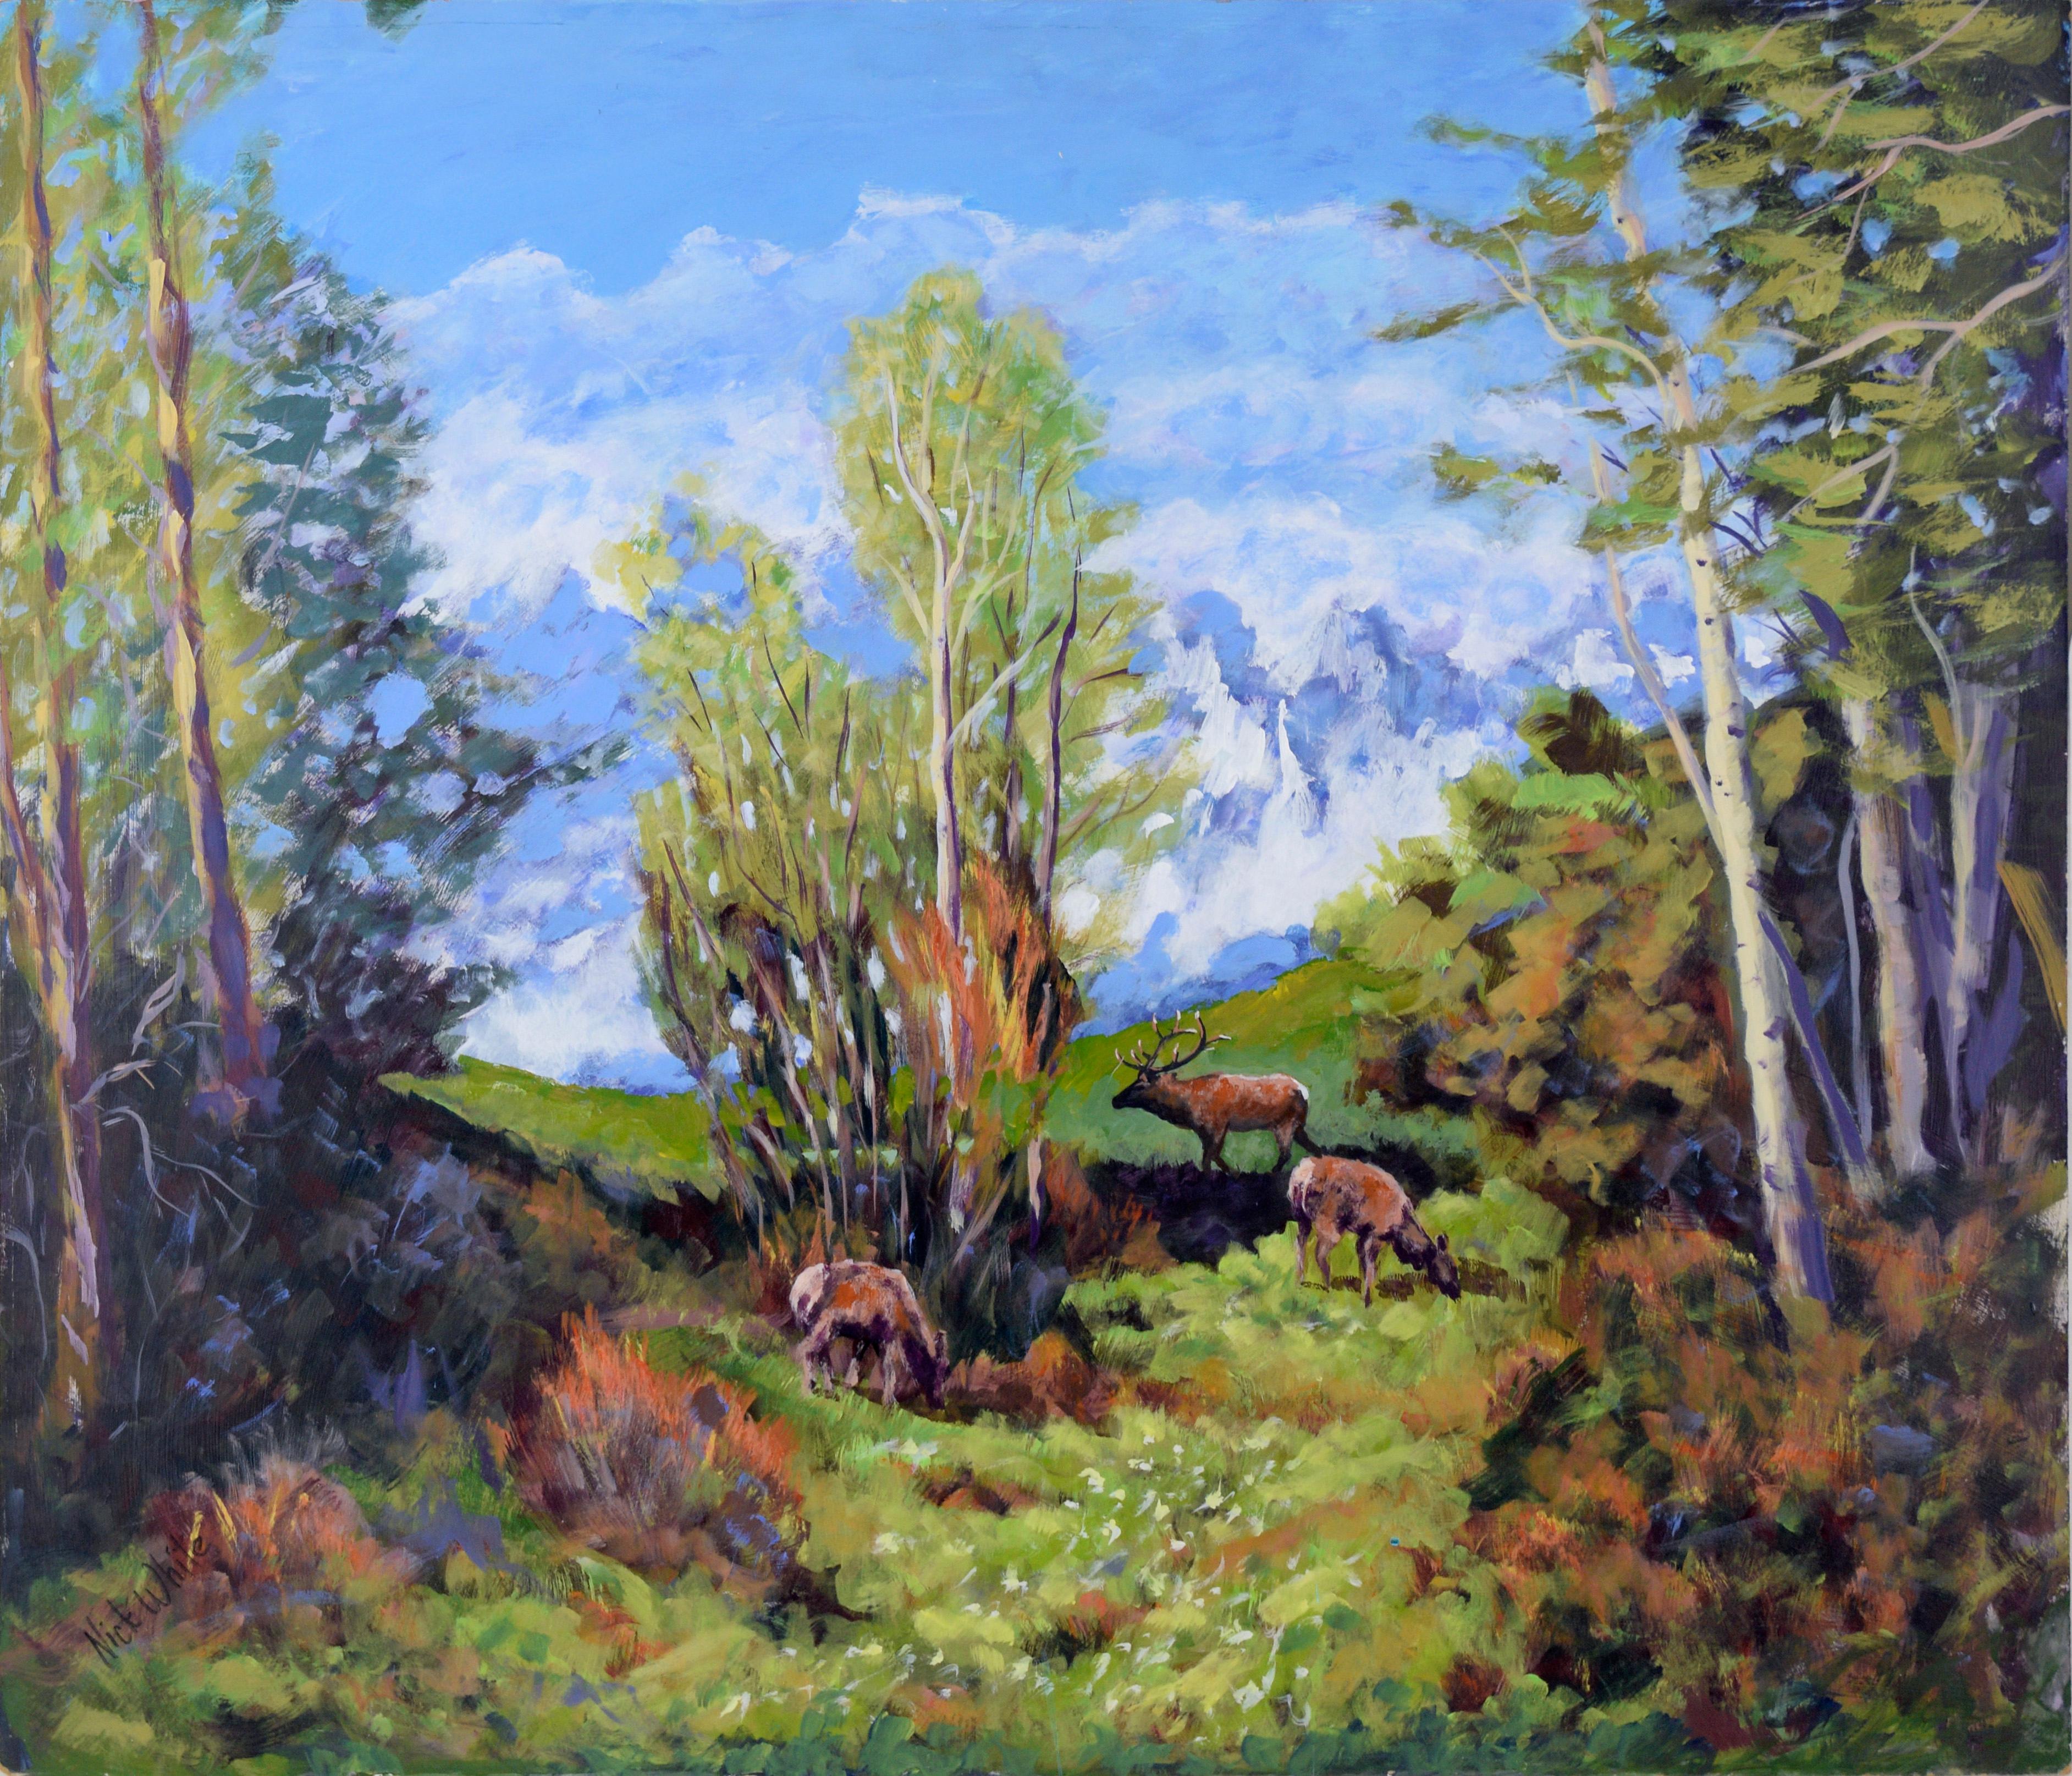 Nick White Landscape Painting - Elk in the Forest - Plein Aire Landscape in Acrylic on Board